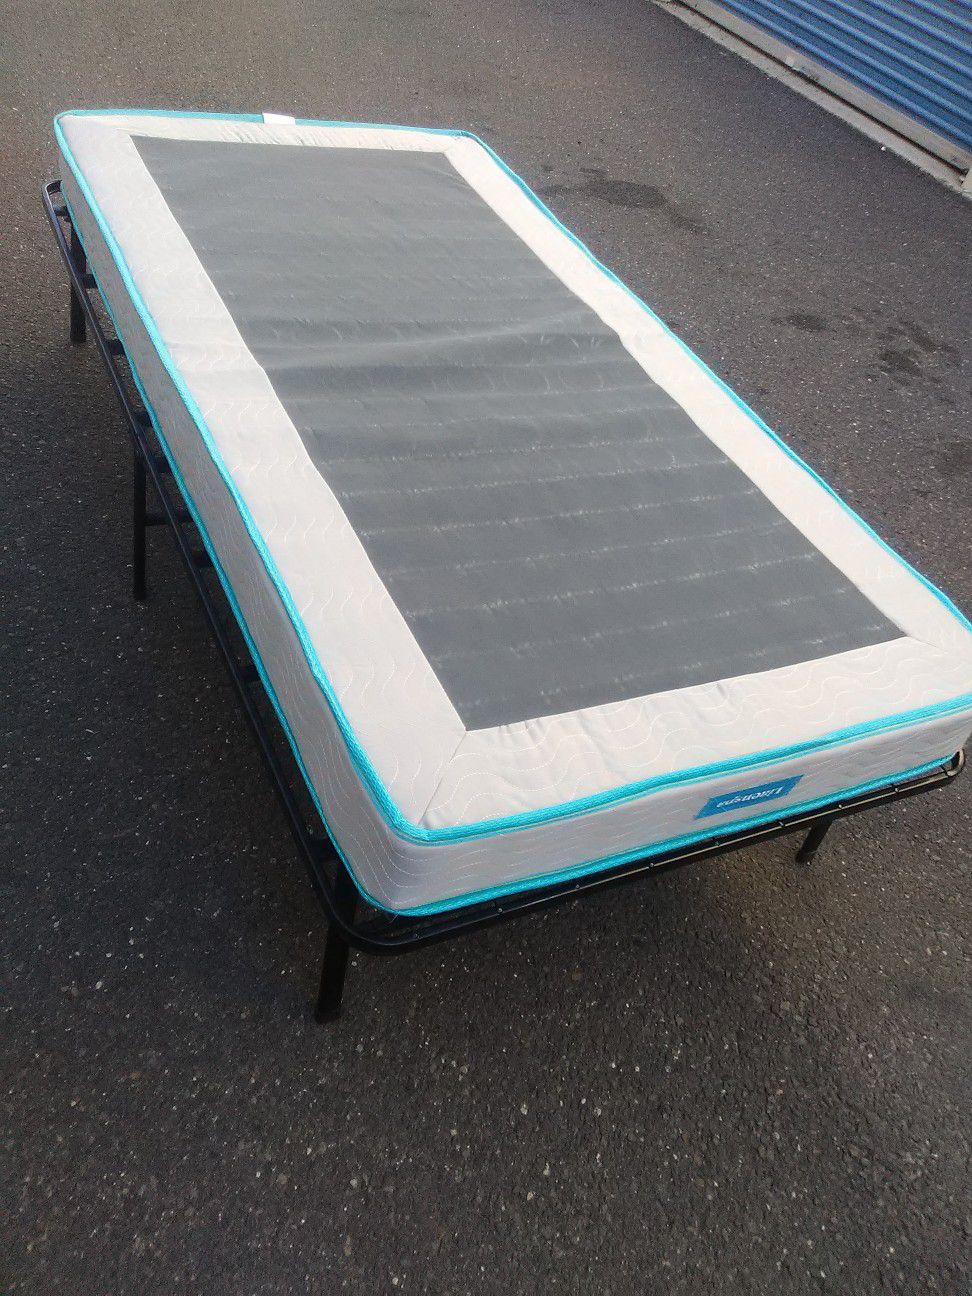 Twin size folding bed excellent new condition lightweight space saver ready for immediate use a couple curbside delivery possible